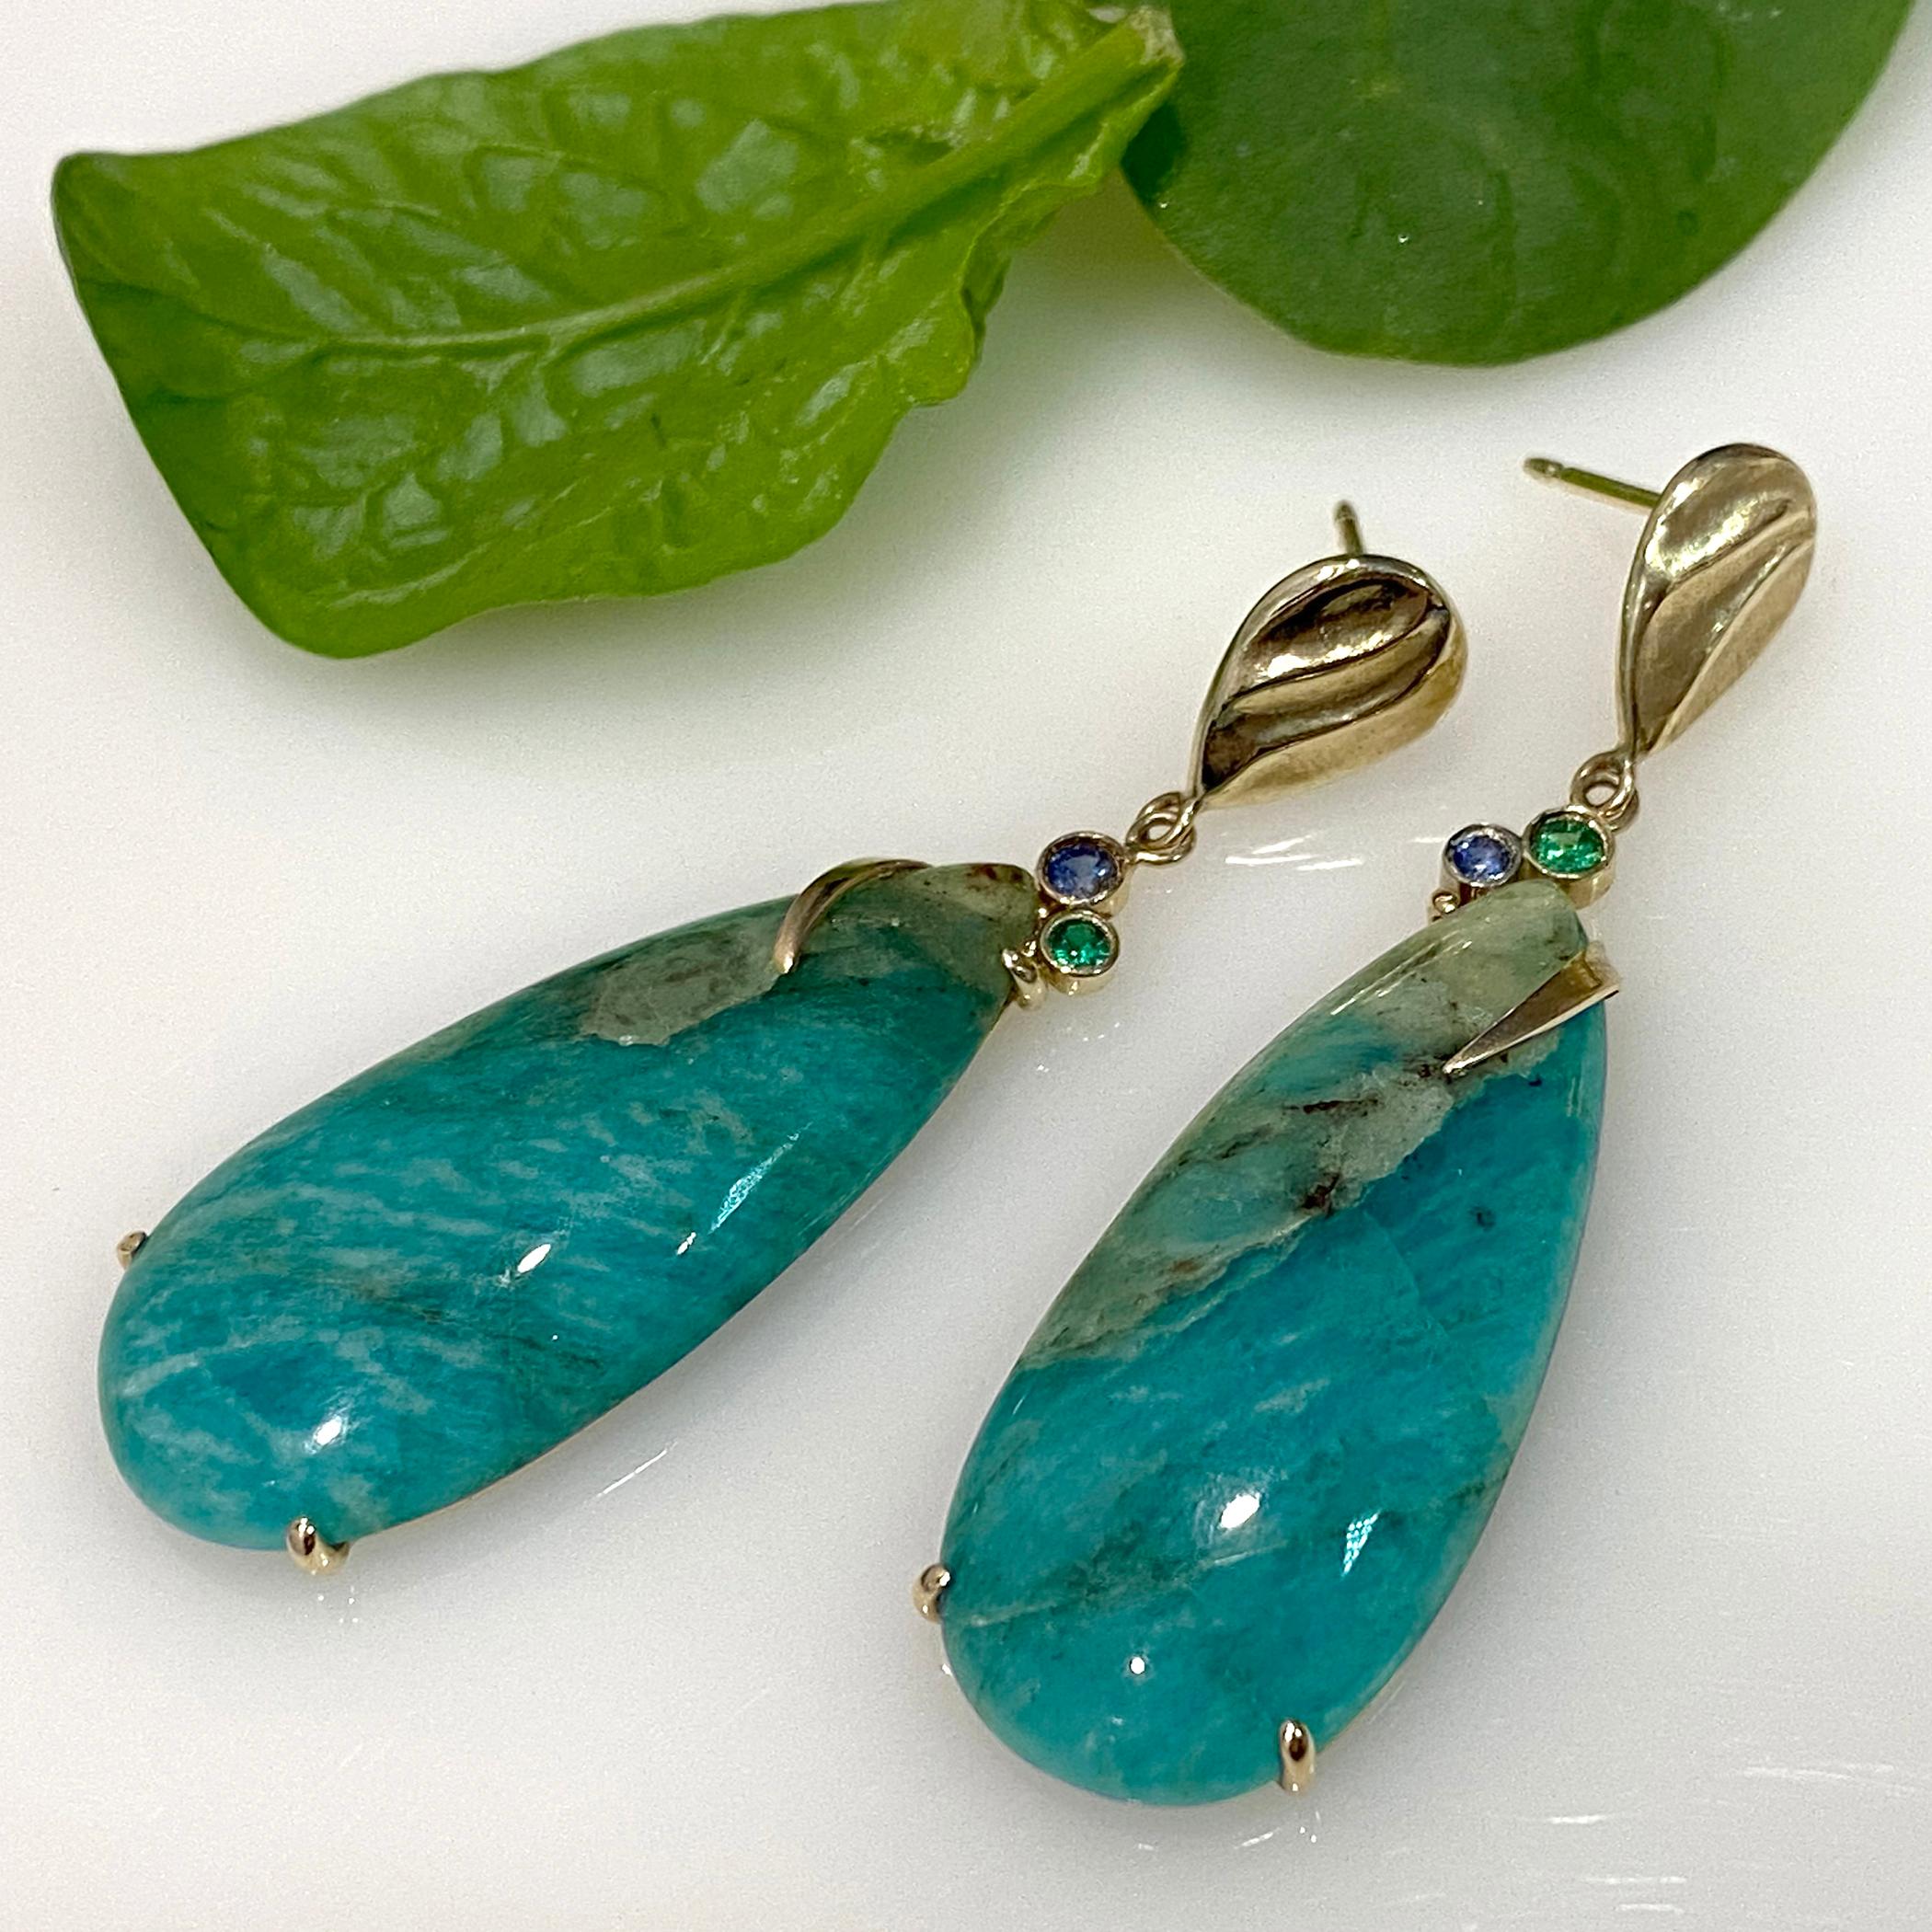 Keiko Mita's contemporary Lagos Earrings, which are handmade from 14 Karat Yellow Gold, feature 37.2 carats (total) natural color Amazonite (no treatment) accented with 0.10 carats (total) Blue Sapphire and 0.09 carats (total) Green Garnet set in 14